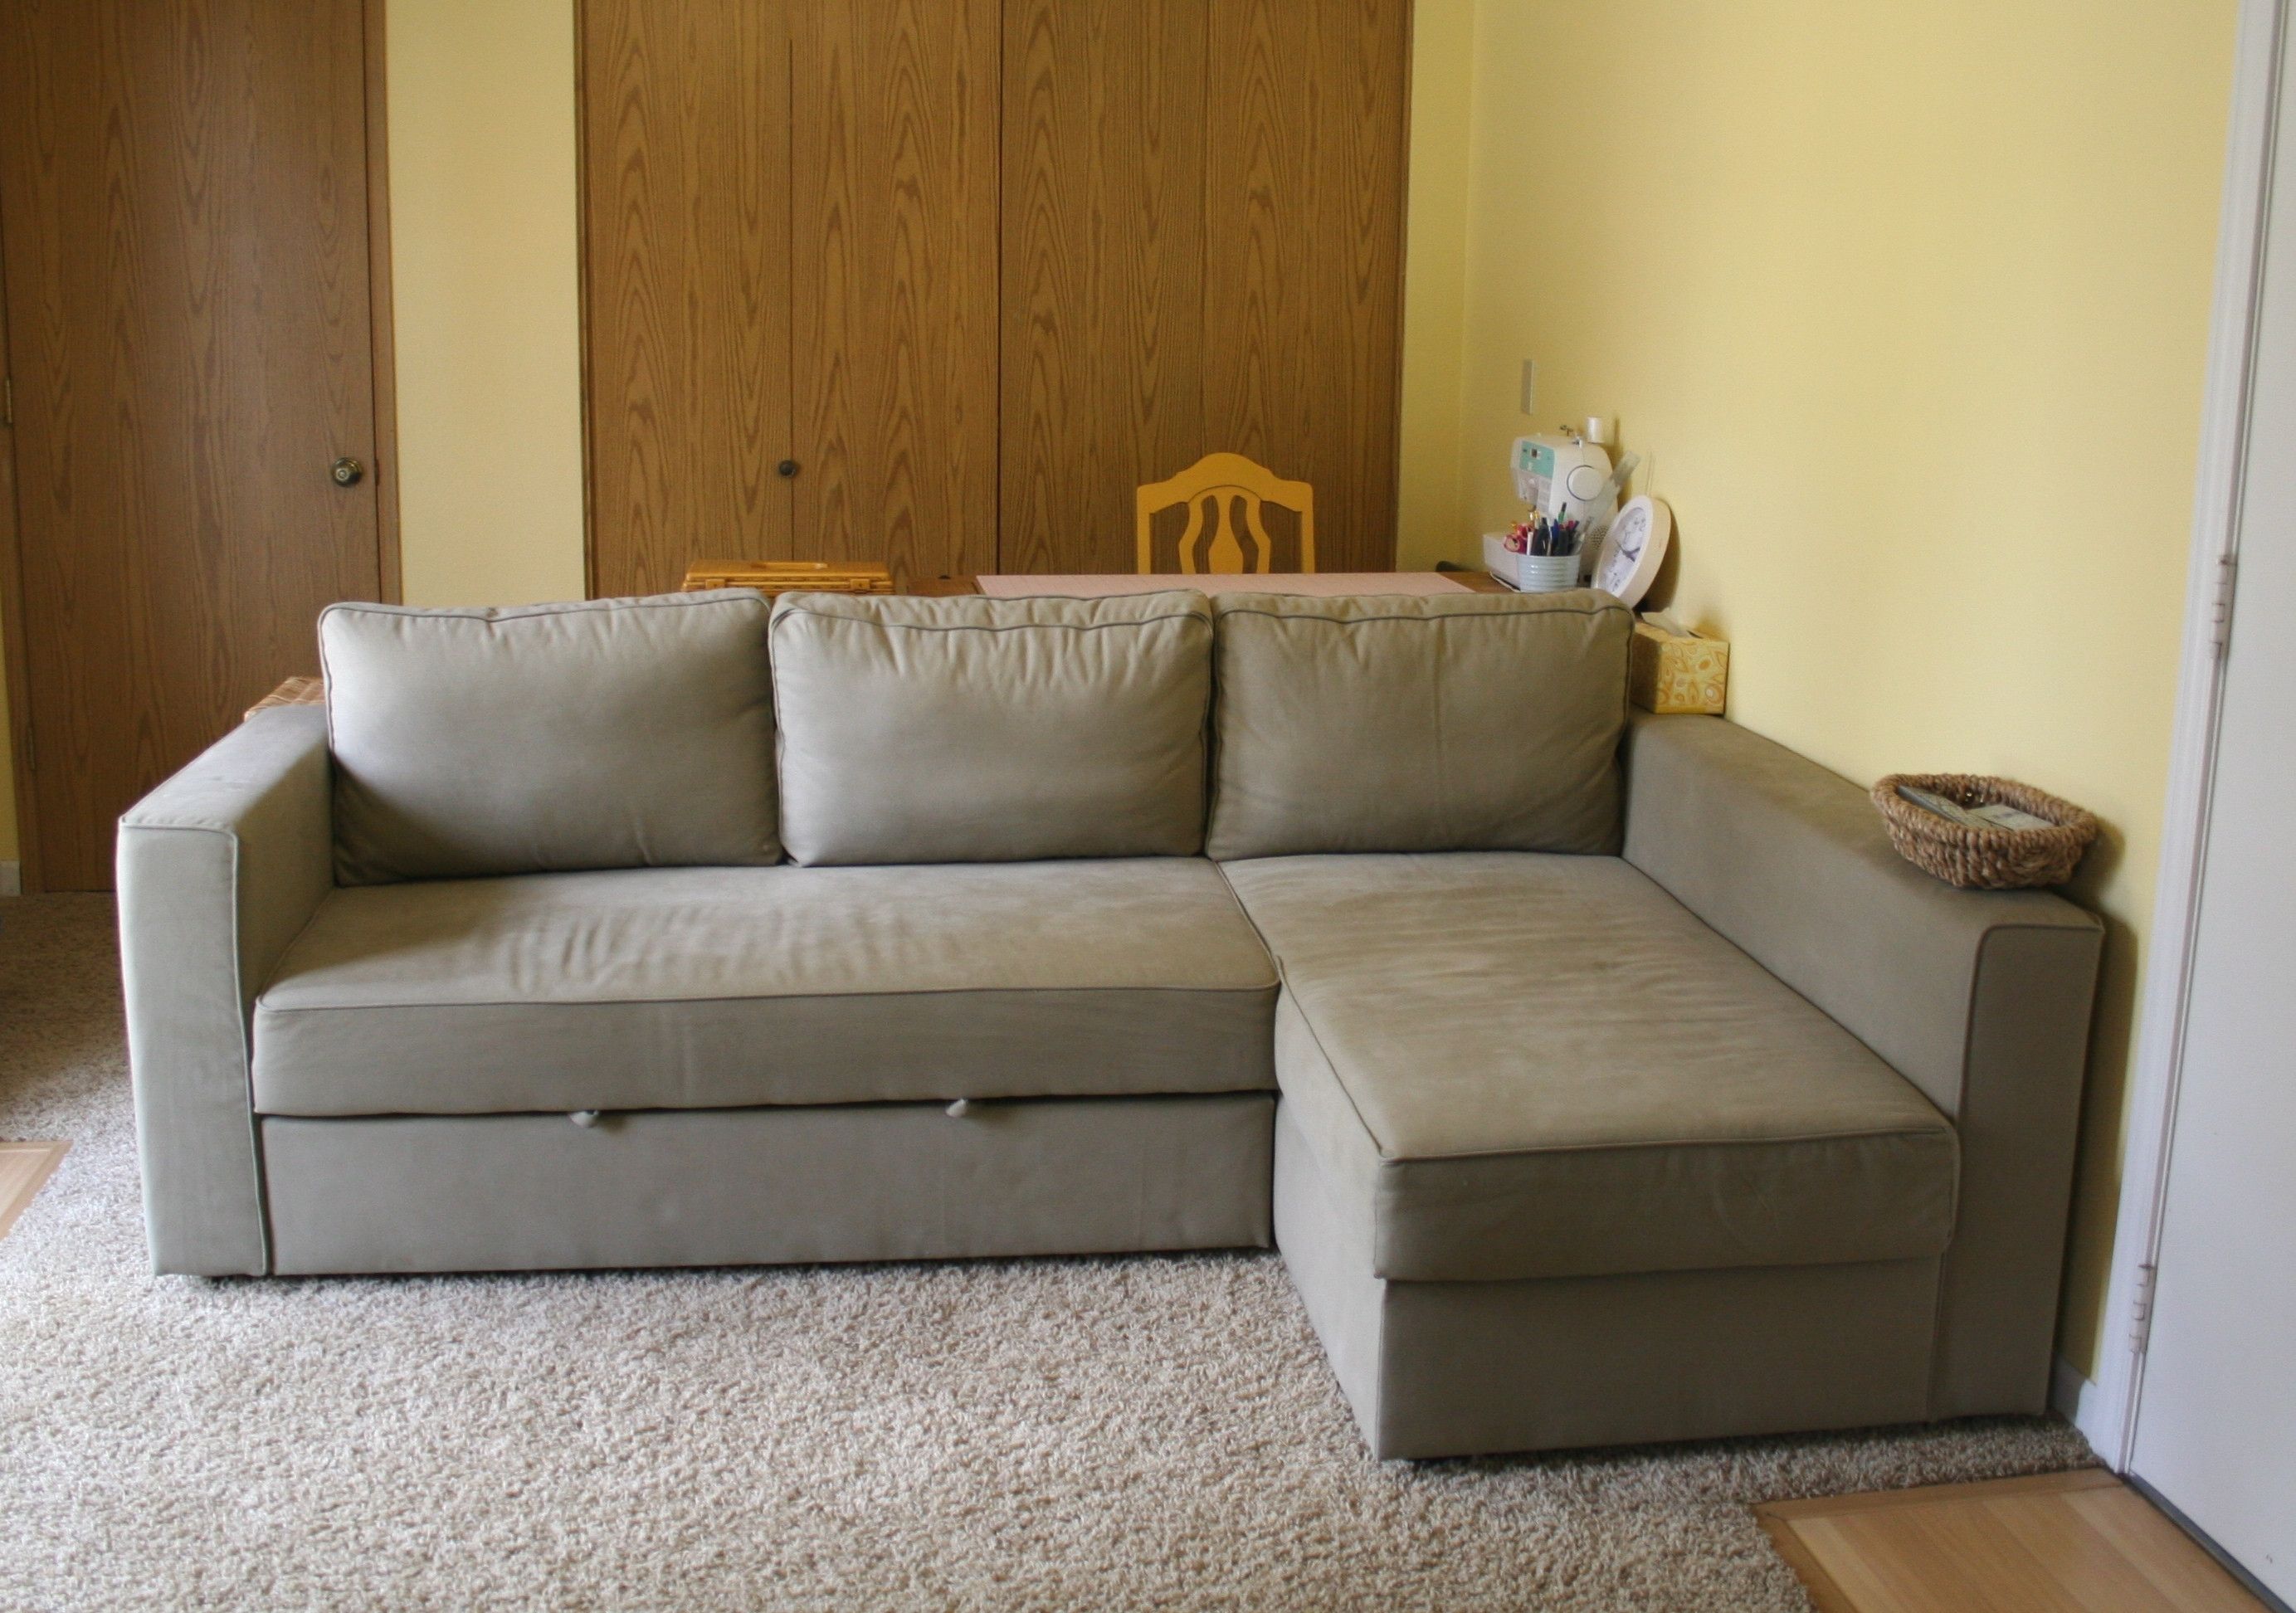 Manstad Sofa Bed Measurements | Conceptstructuresllc Within Manstad Sofas (View 1 of 10)